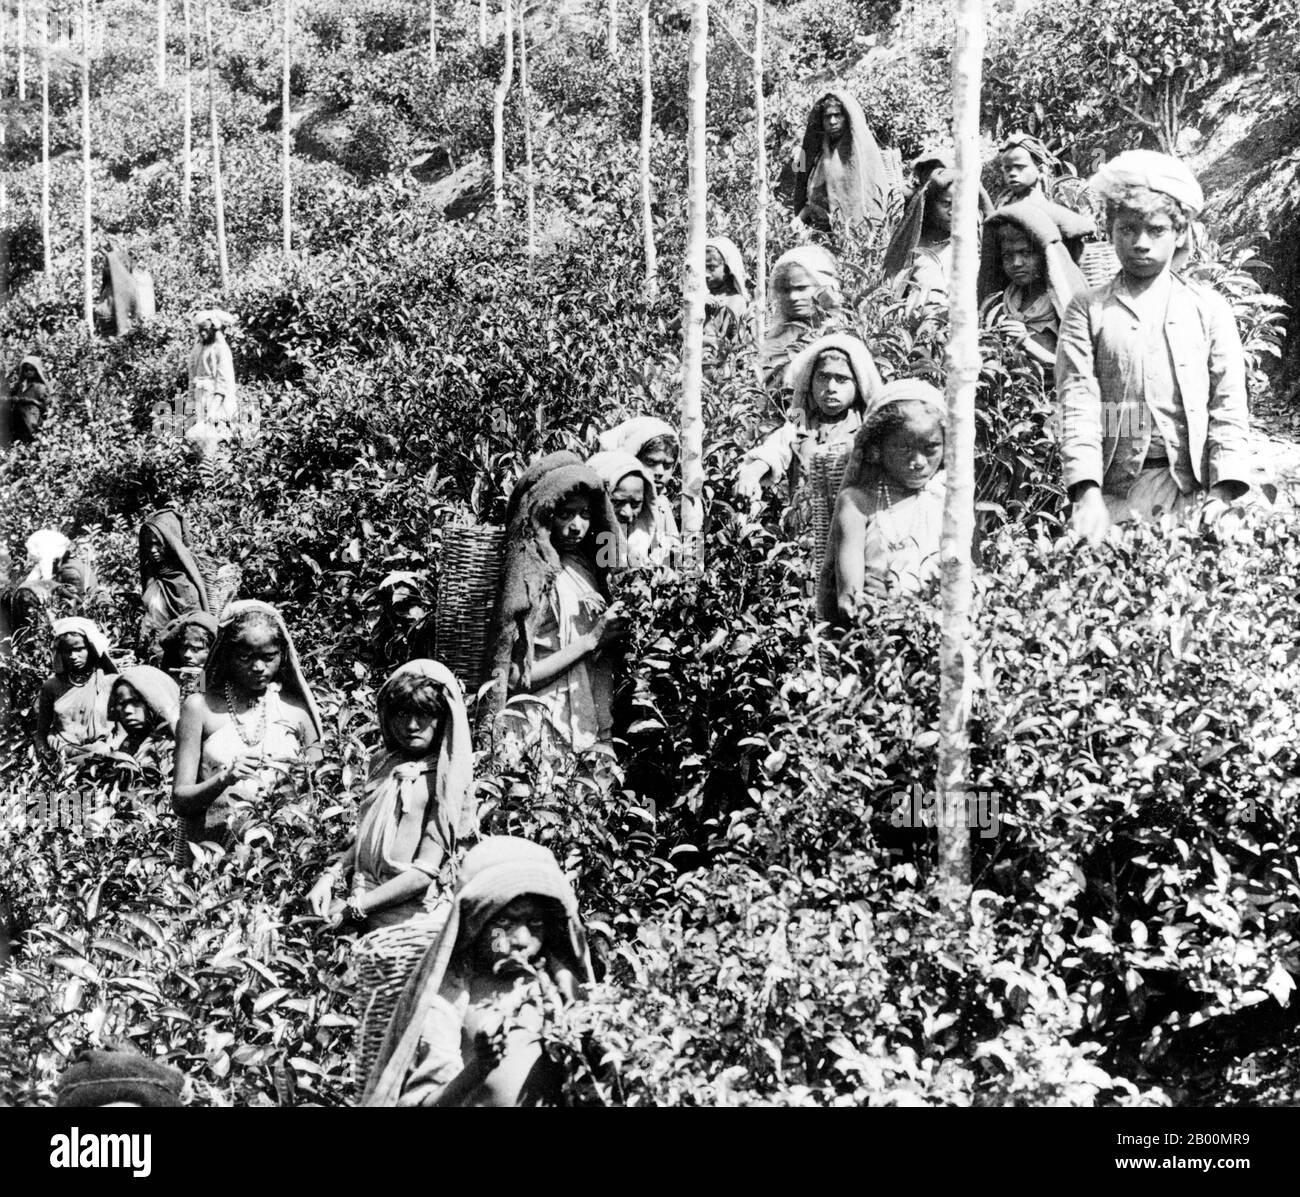 Sri Lanka: Children picking tea at Talawakele, near Nuwara Eliya, c. 1900.  Tea production in Sri Lanka, formerly Ceylon, is of high importance to the Sri Lankan economy and the world market. The country is the world's fourth largest producer of tea and the industry is one of the country's main sources of foreign exchange and a significant source of income for laborers, with tea accounting for 15% of the GDP, generating roughly $700 million annually. In 1995 Sri Lanka was the world's leading exporter of tea, (rather than producer) with 23% of the total world export. Stock Photo